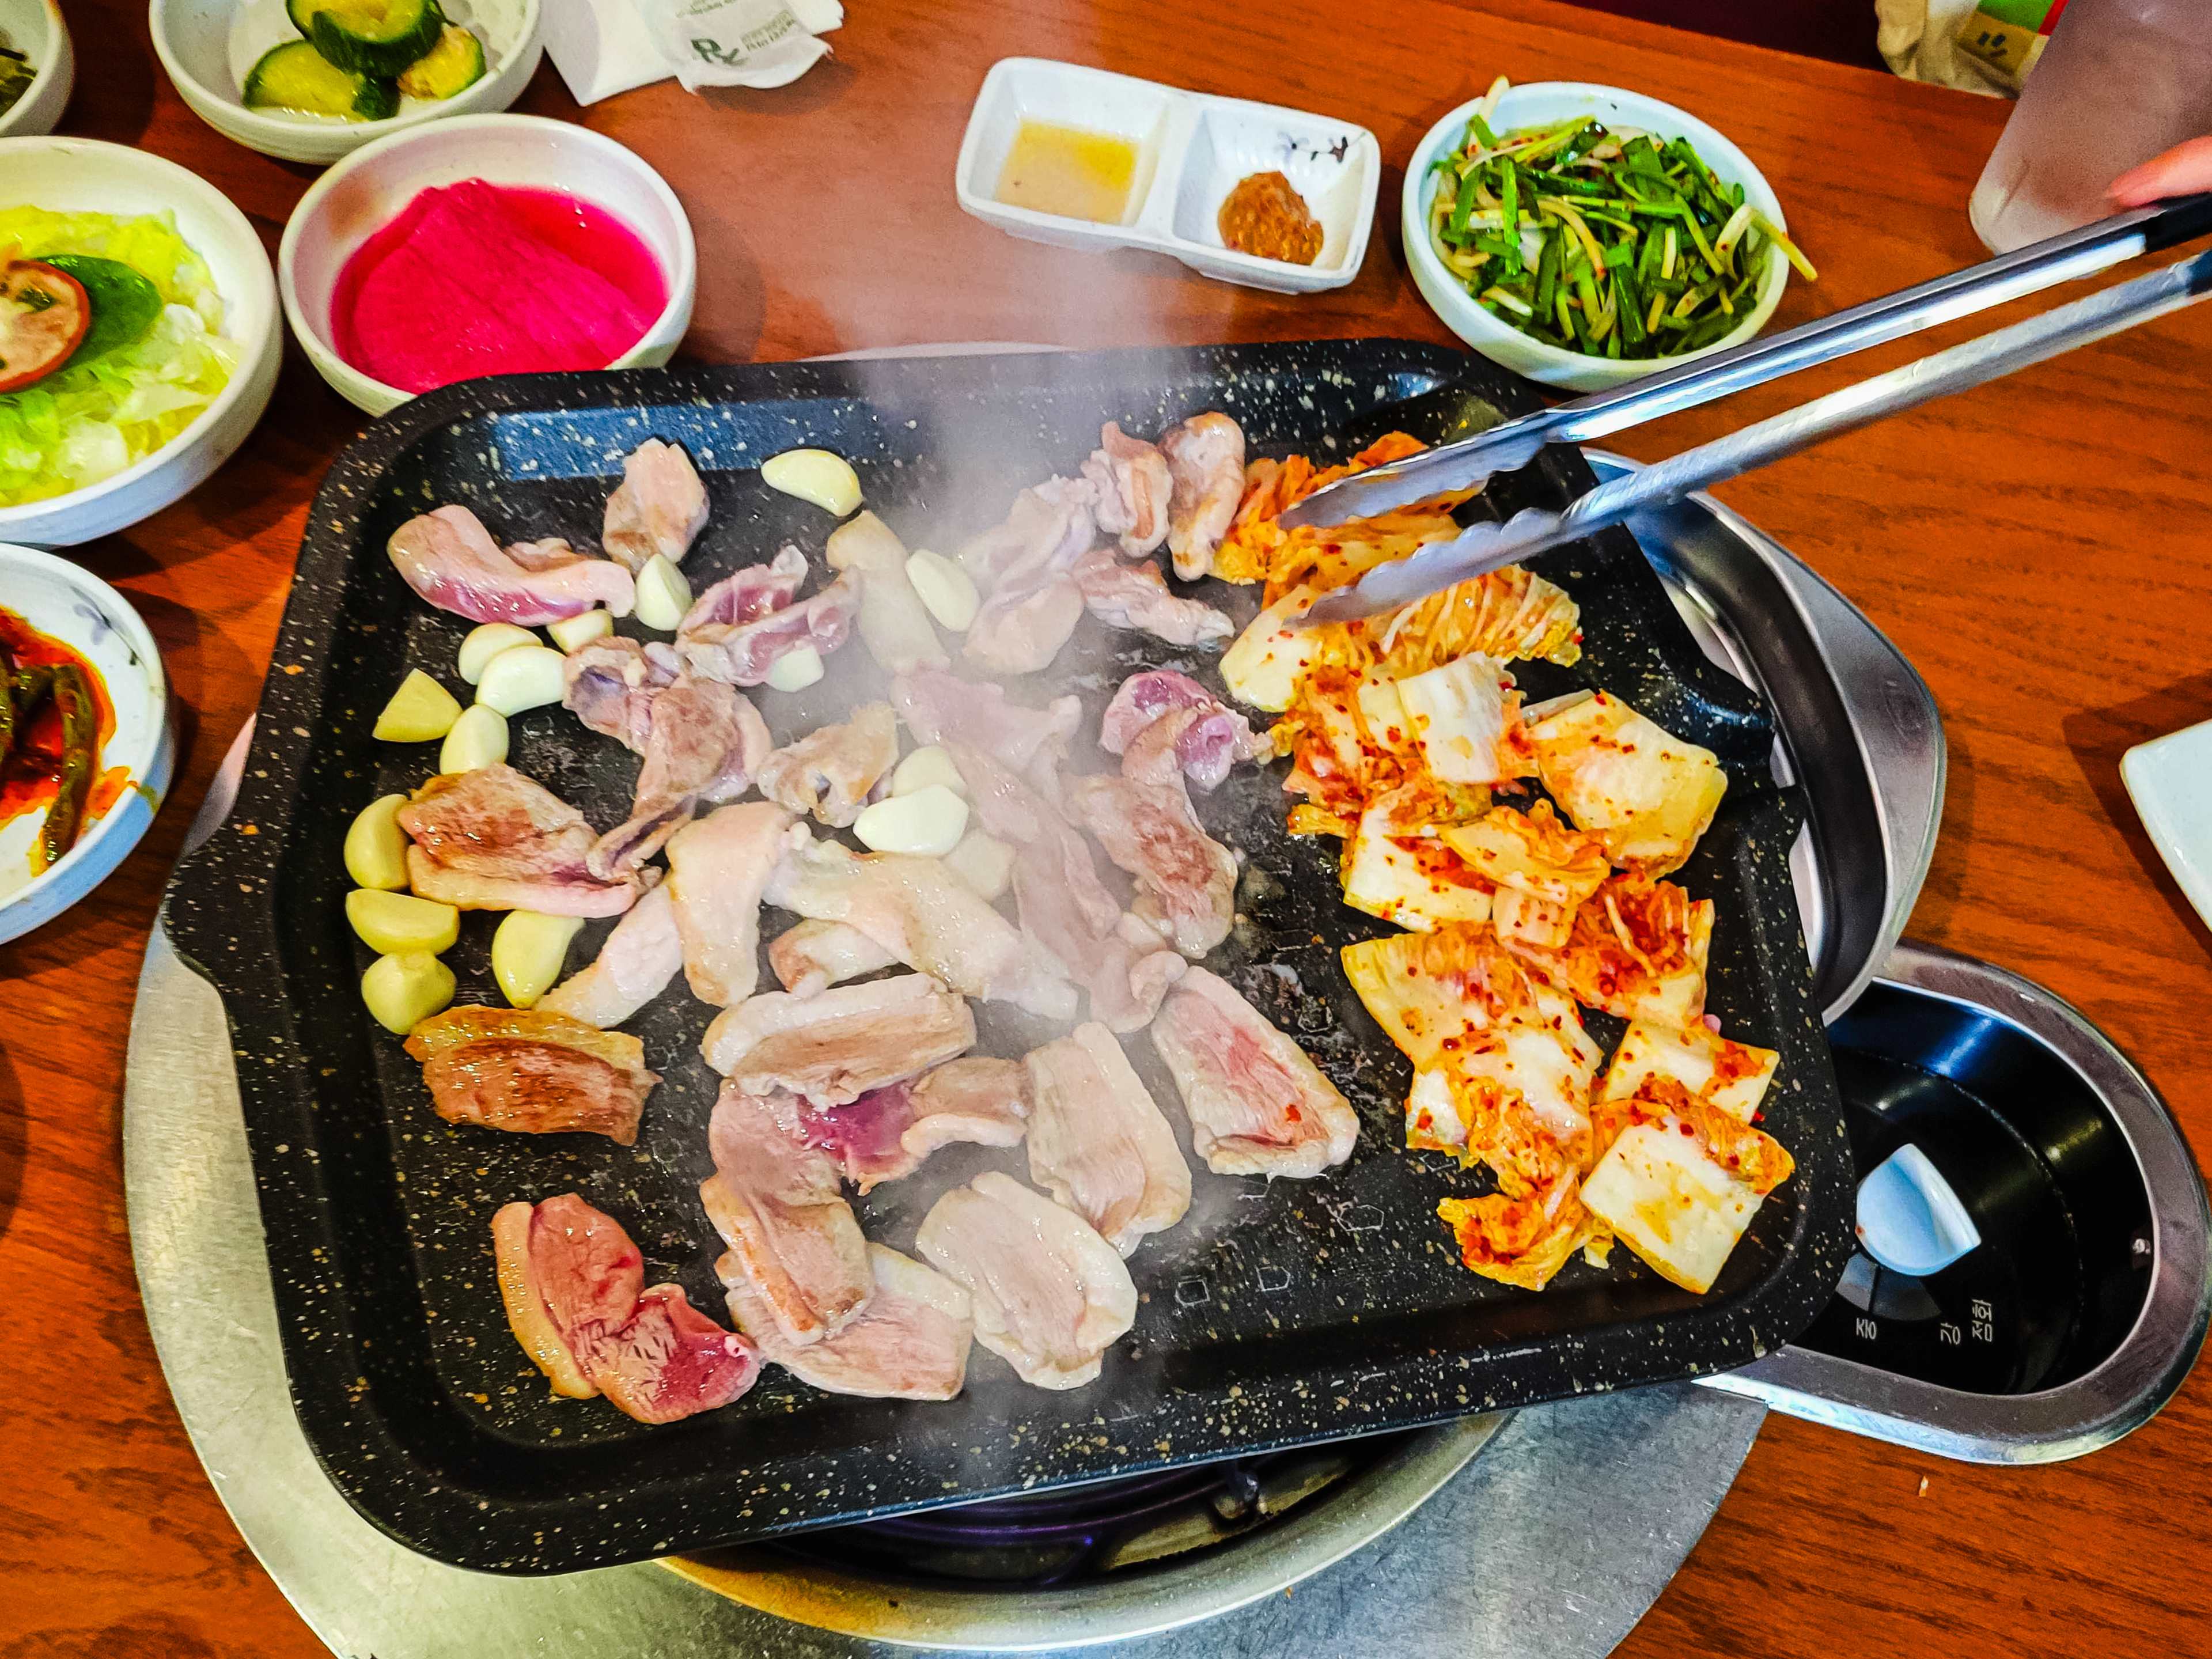 Duck and kimchi cooking on a grill in the middle of a table.